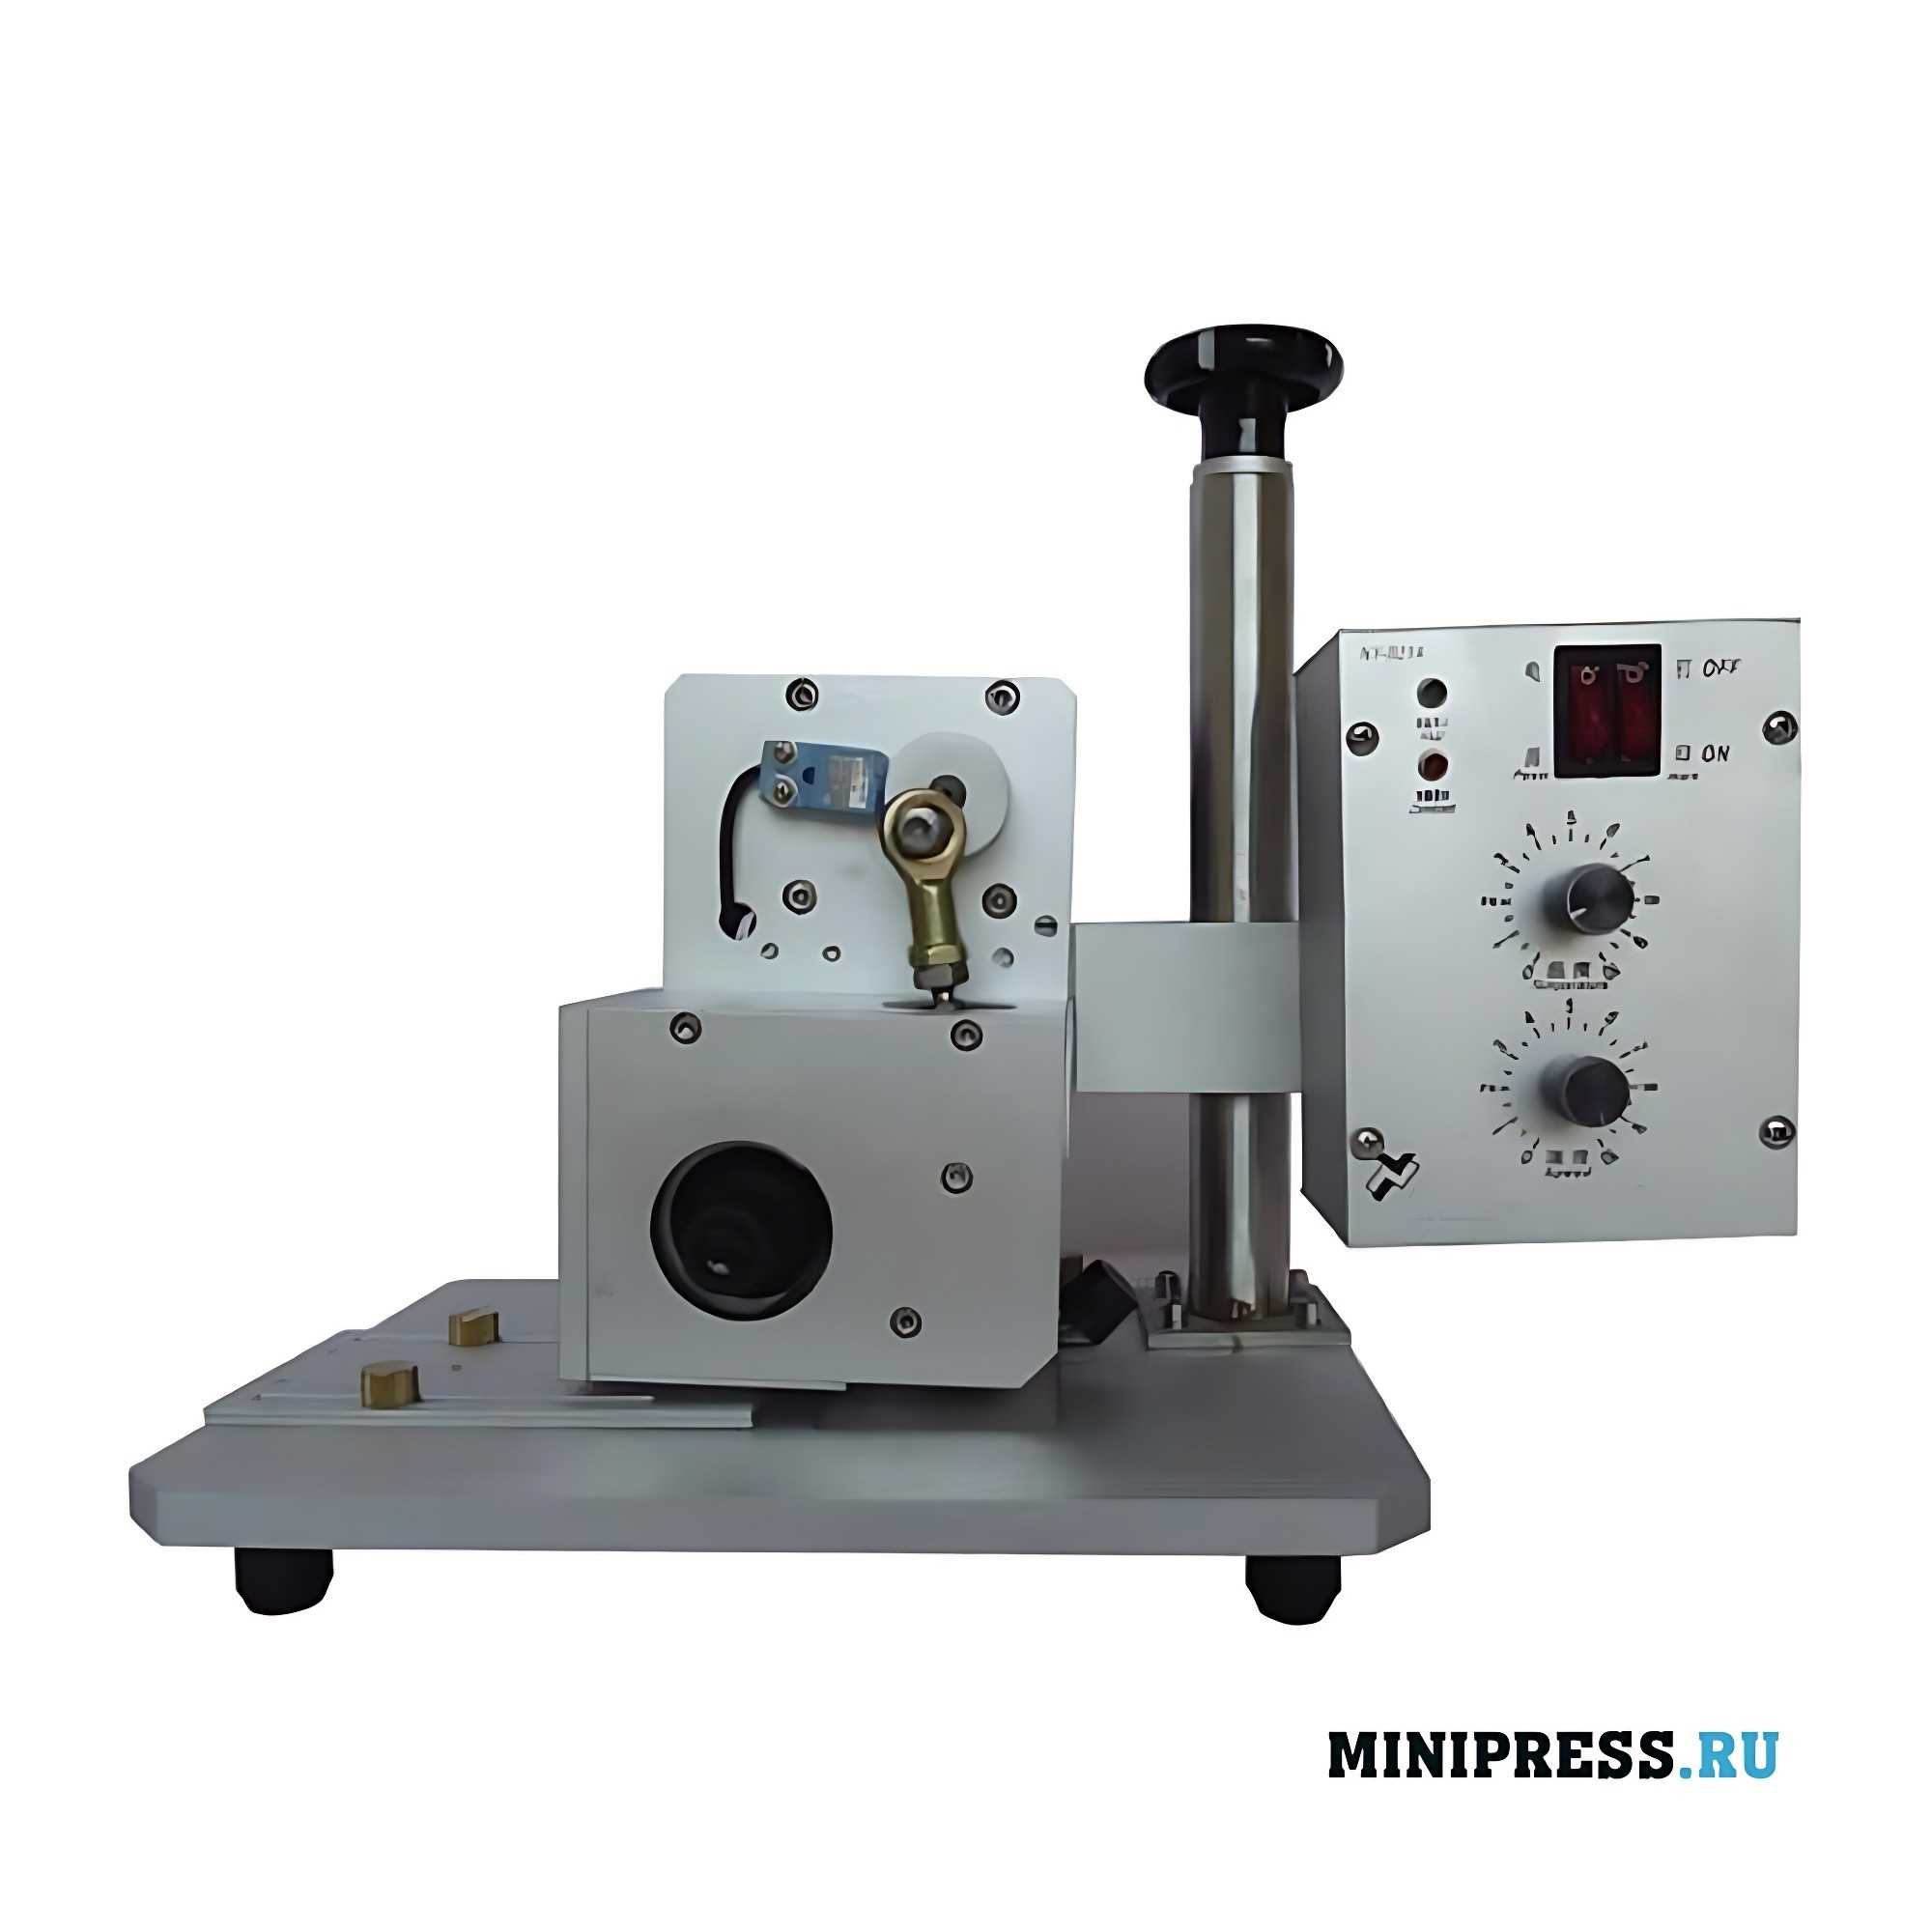 Desktop equipment with ink rollers for applying the date NPE 1B